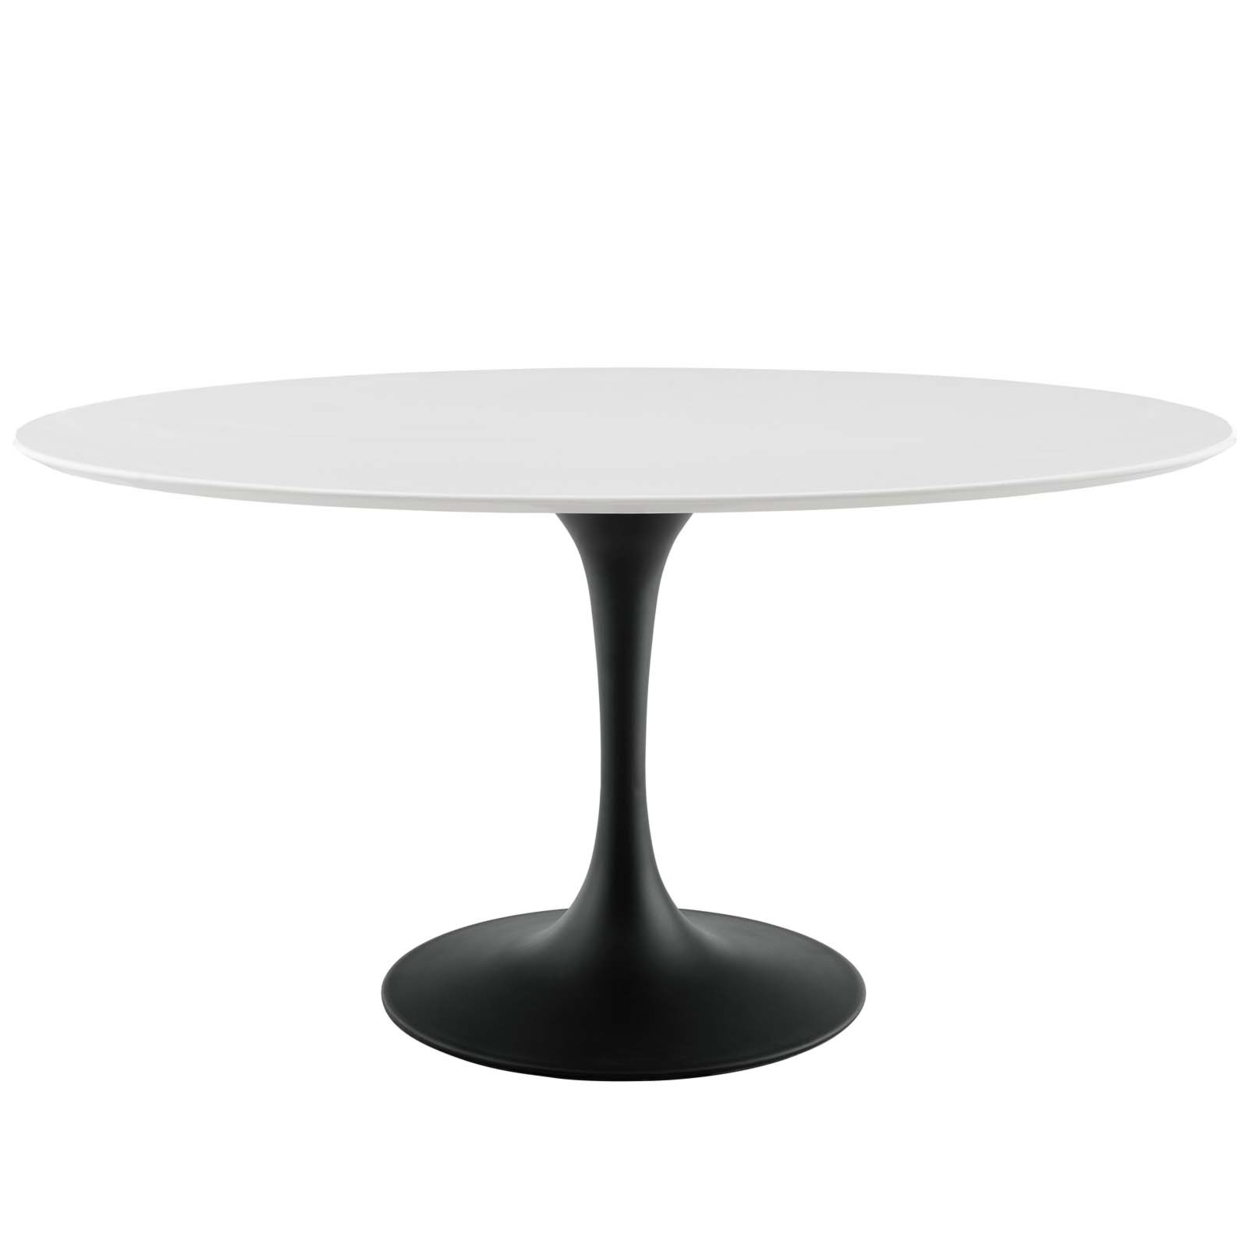 Lippa 60 Oval Wood Top Dining Table, Black White